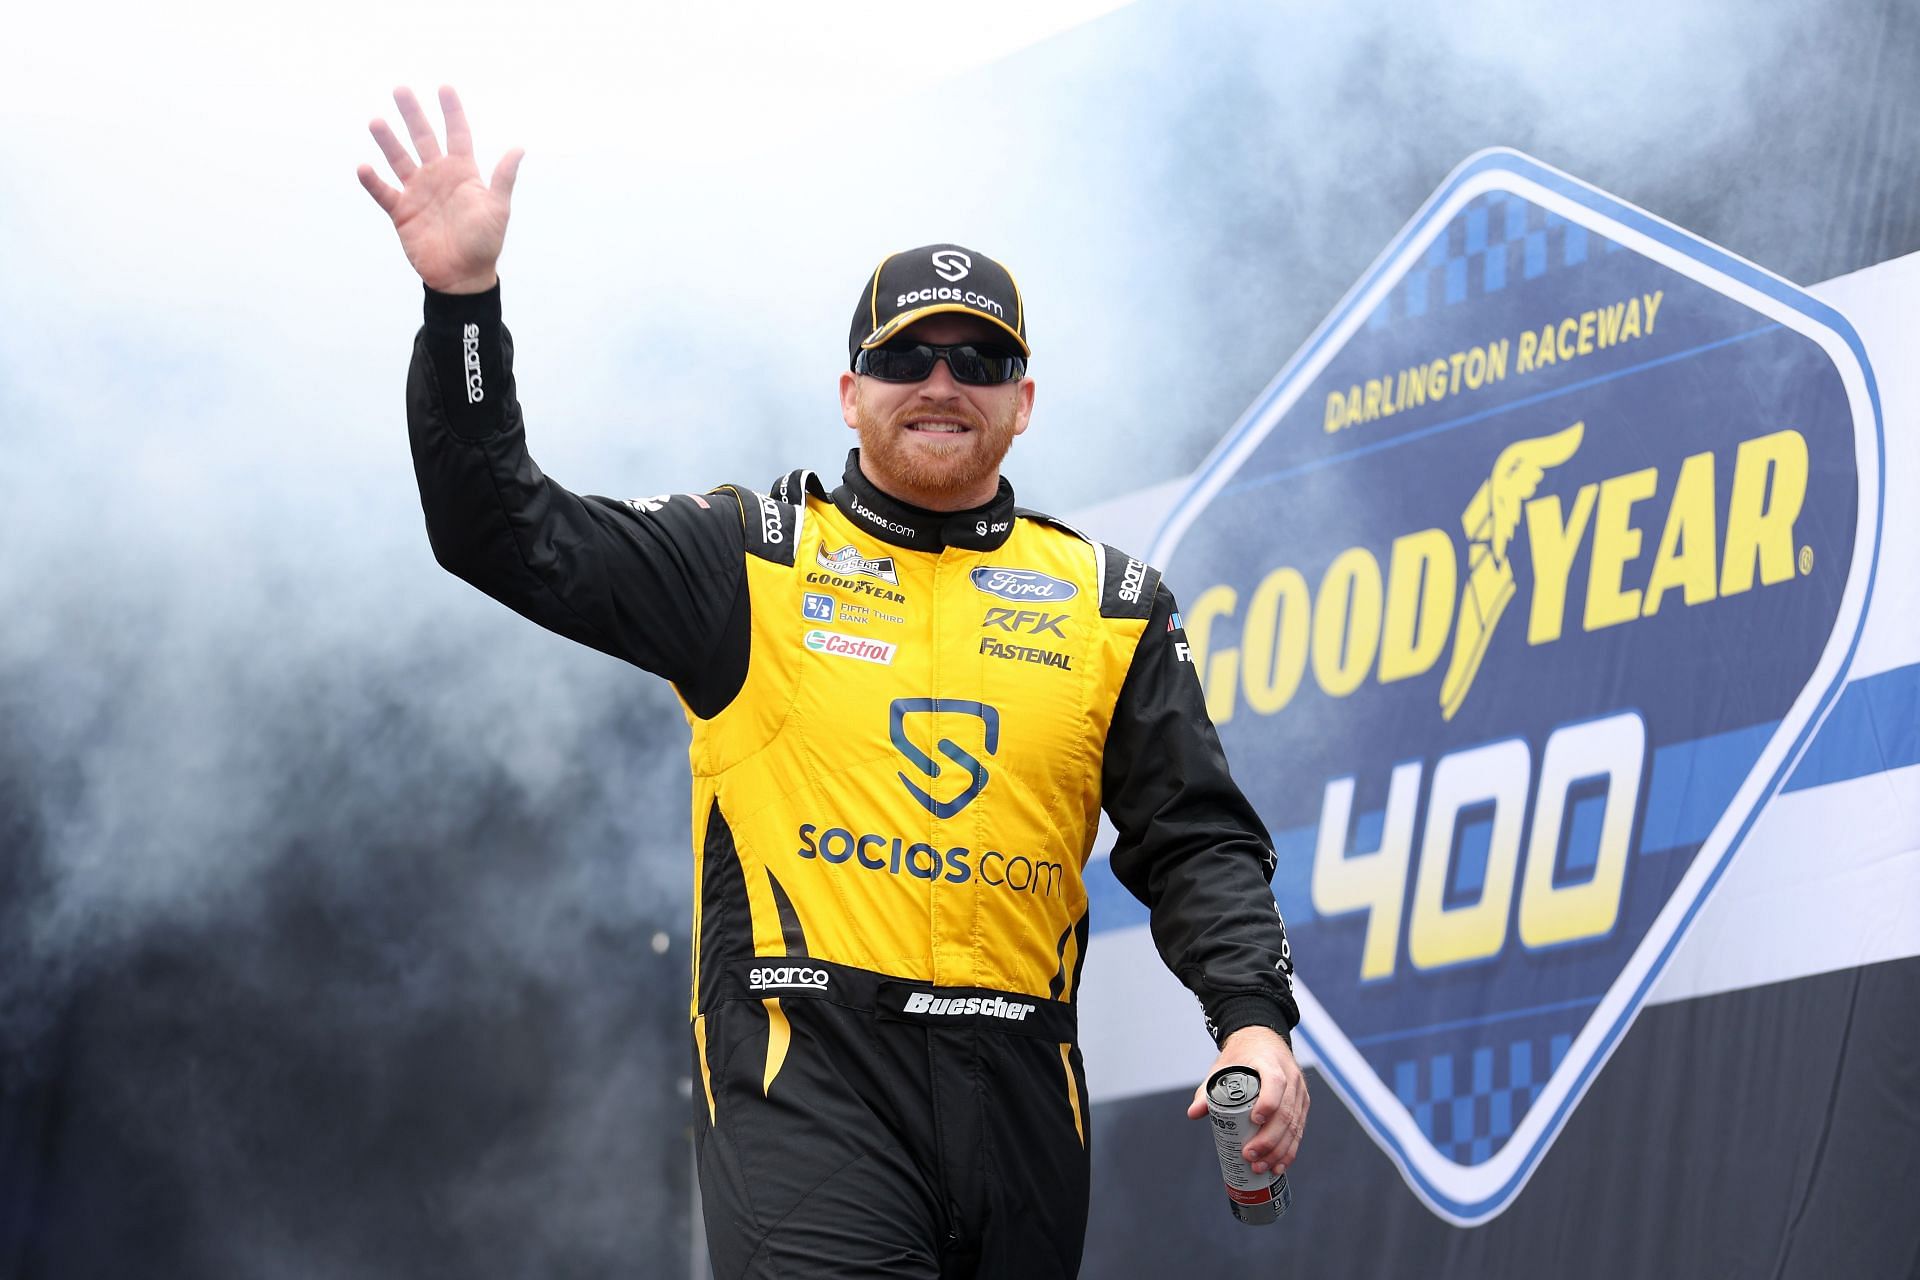 Chris Buescher waves to fans as he walks on stage during driver intros before the NASCAR Cup Series Goodyear 400 at Darlington Raceway